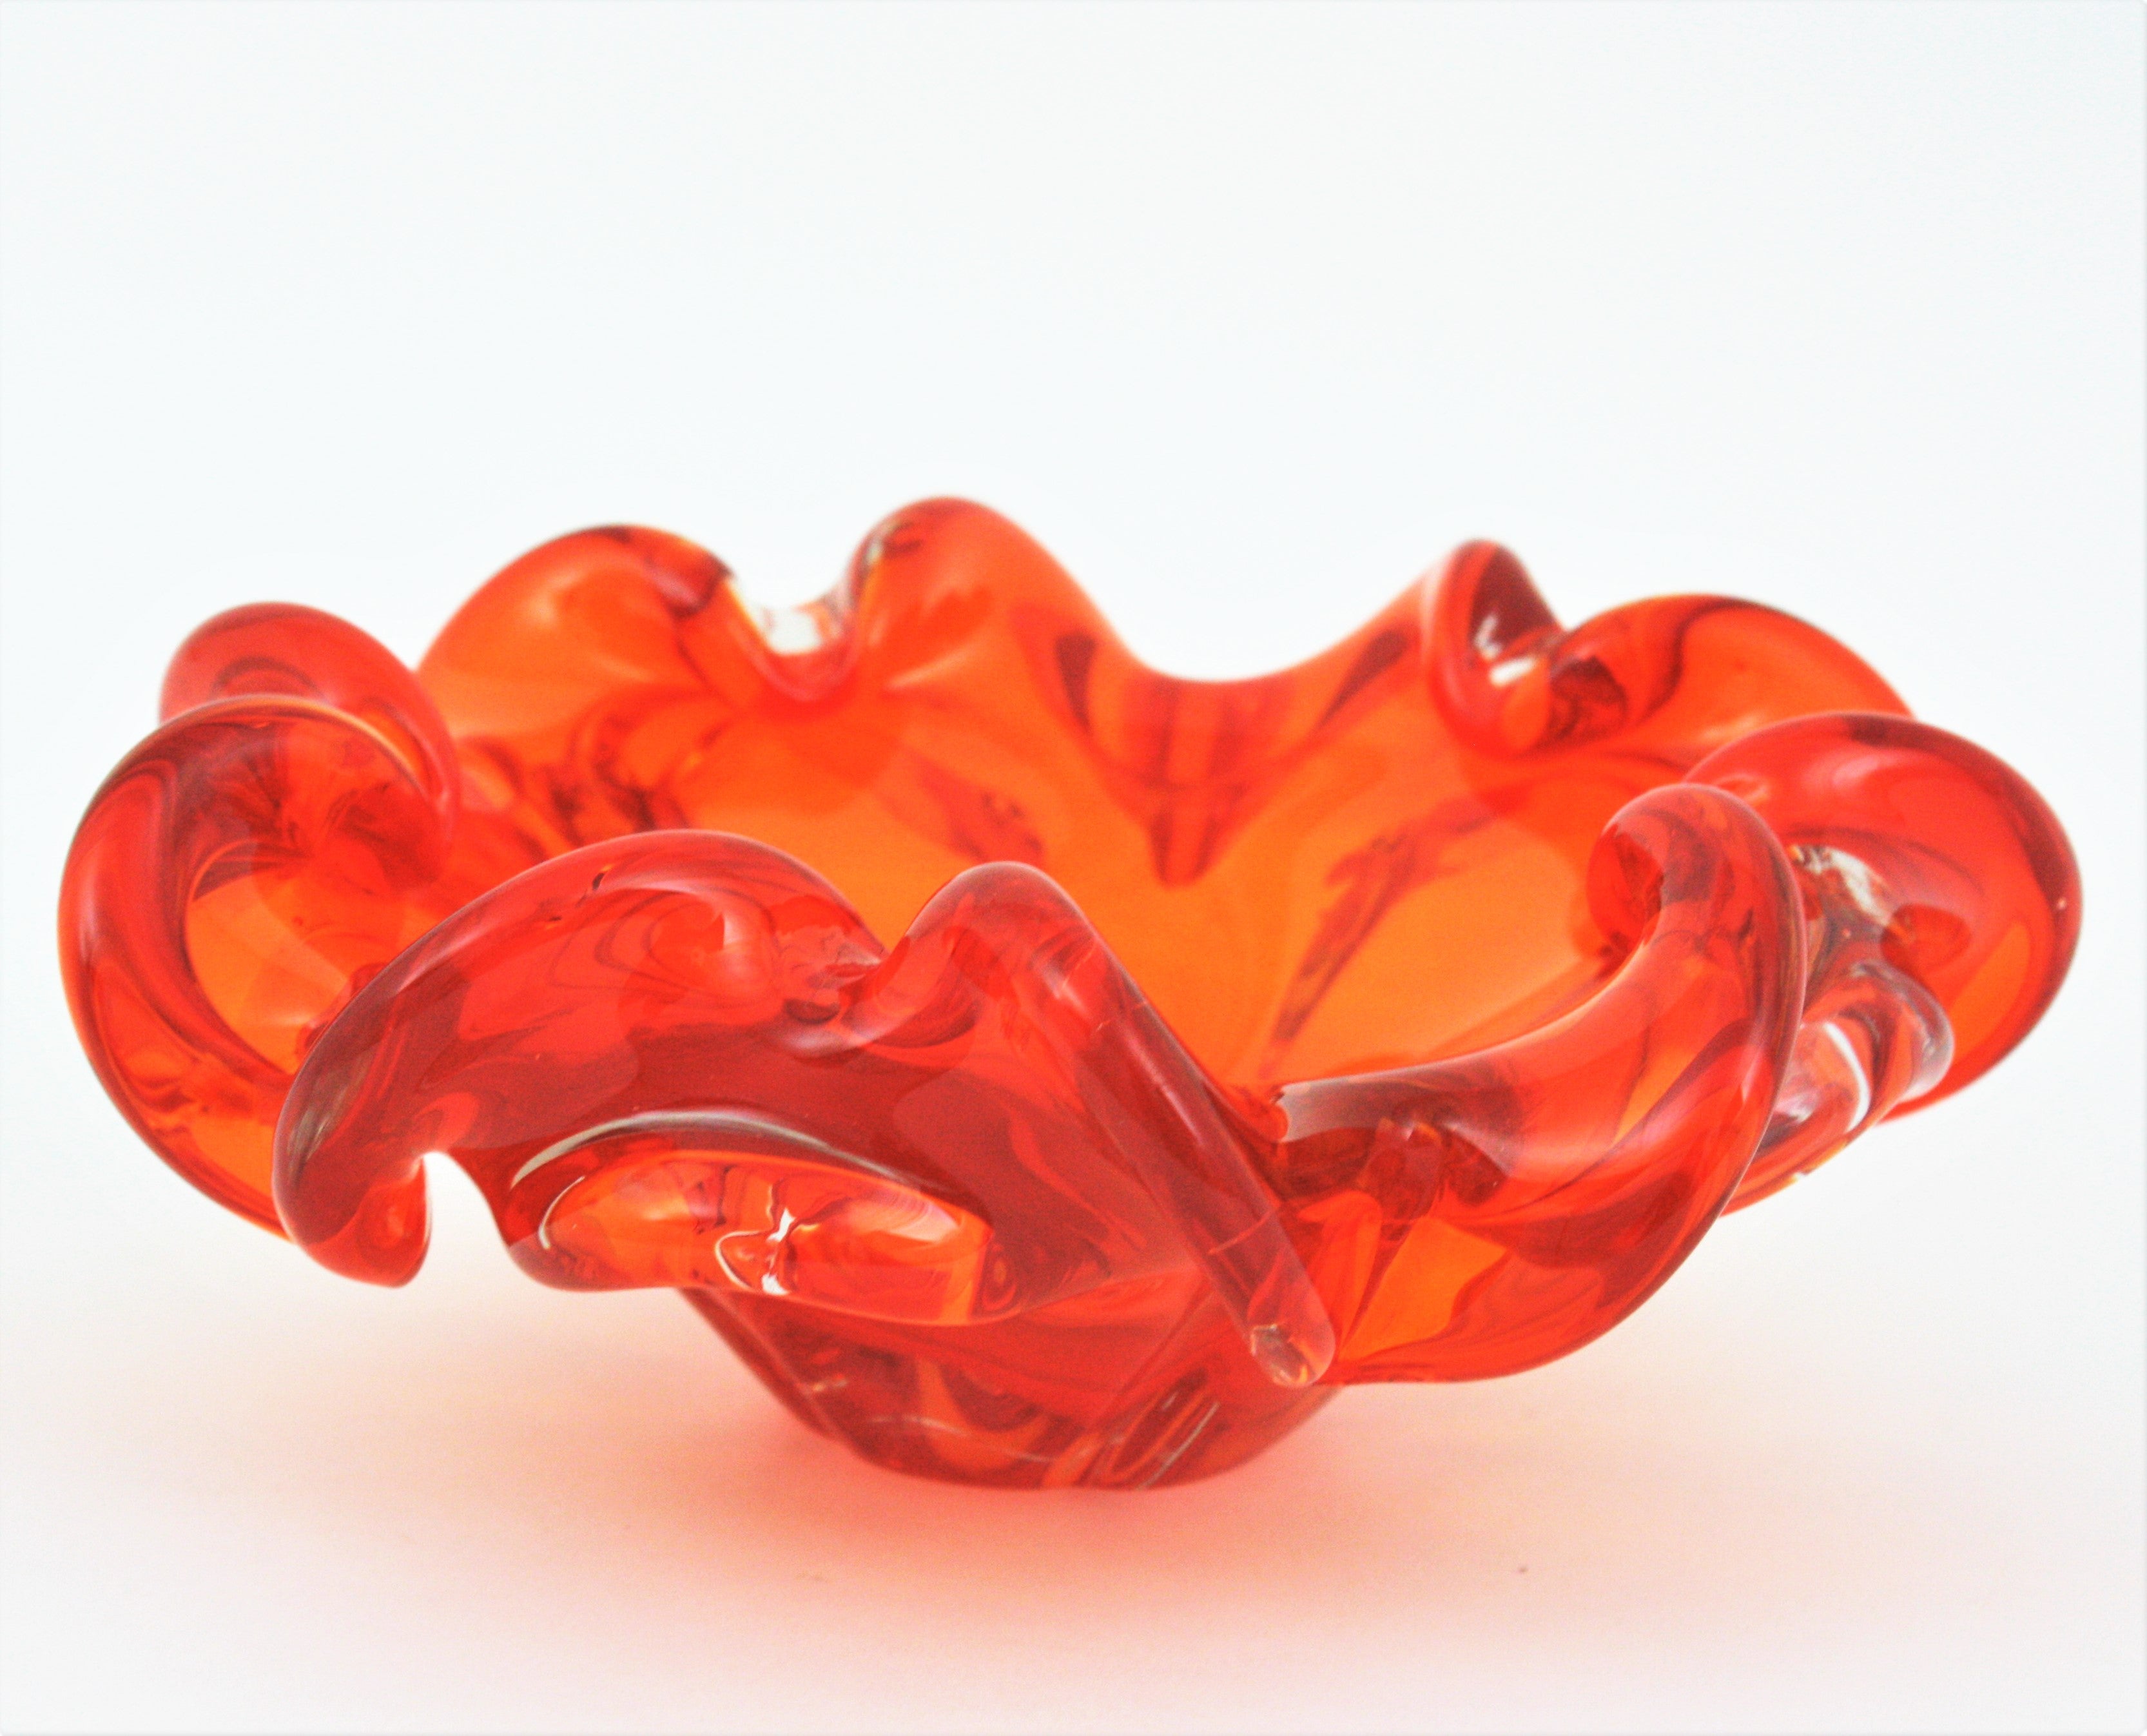 20th Century Midcentury Italian Murano Sommerso Orange and Clear Art Glass Bowl / Ashtray For Sale